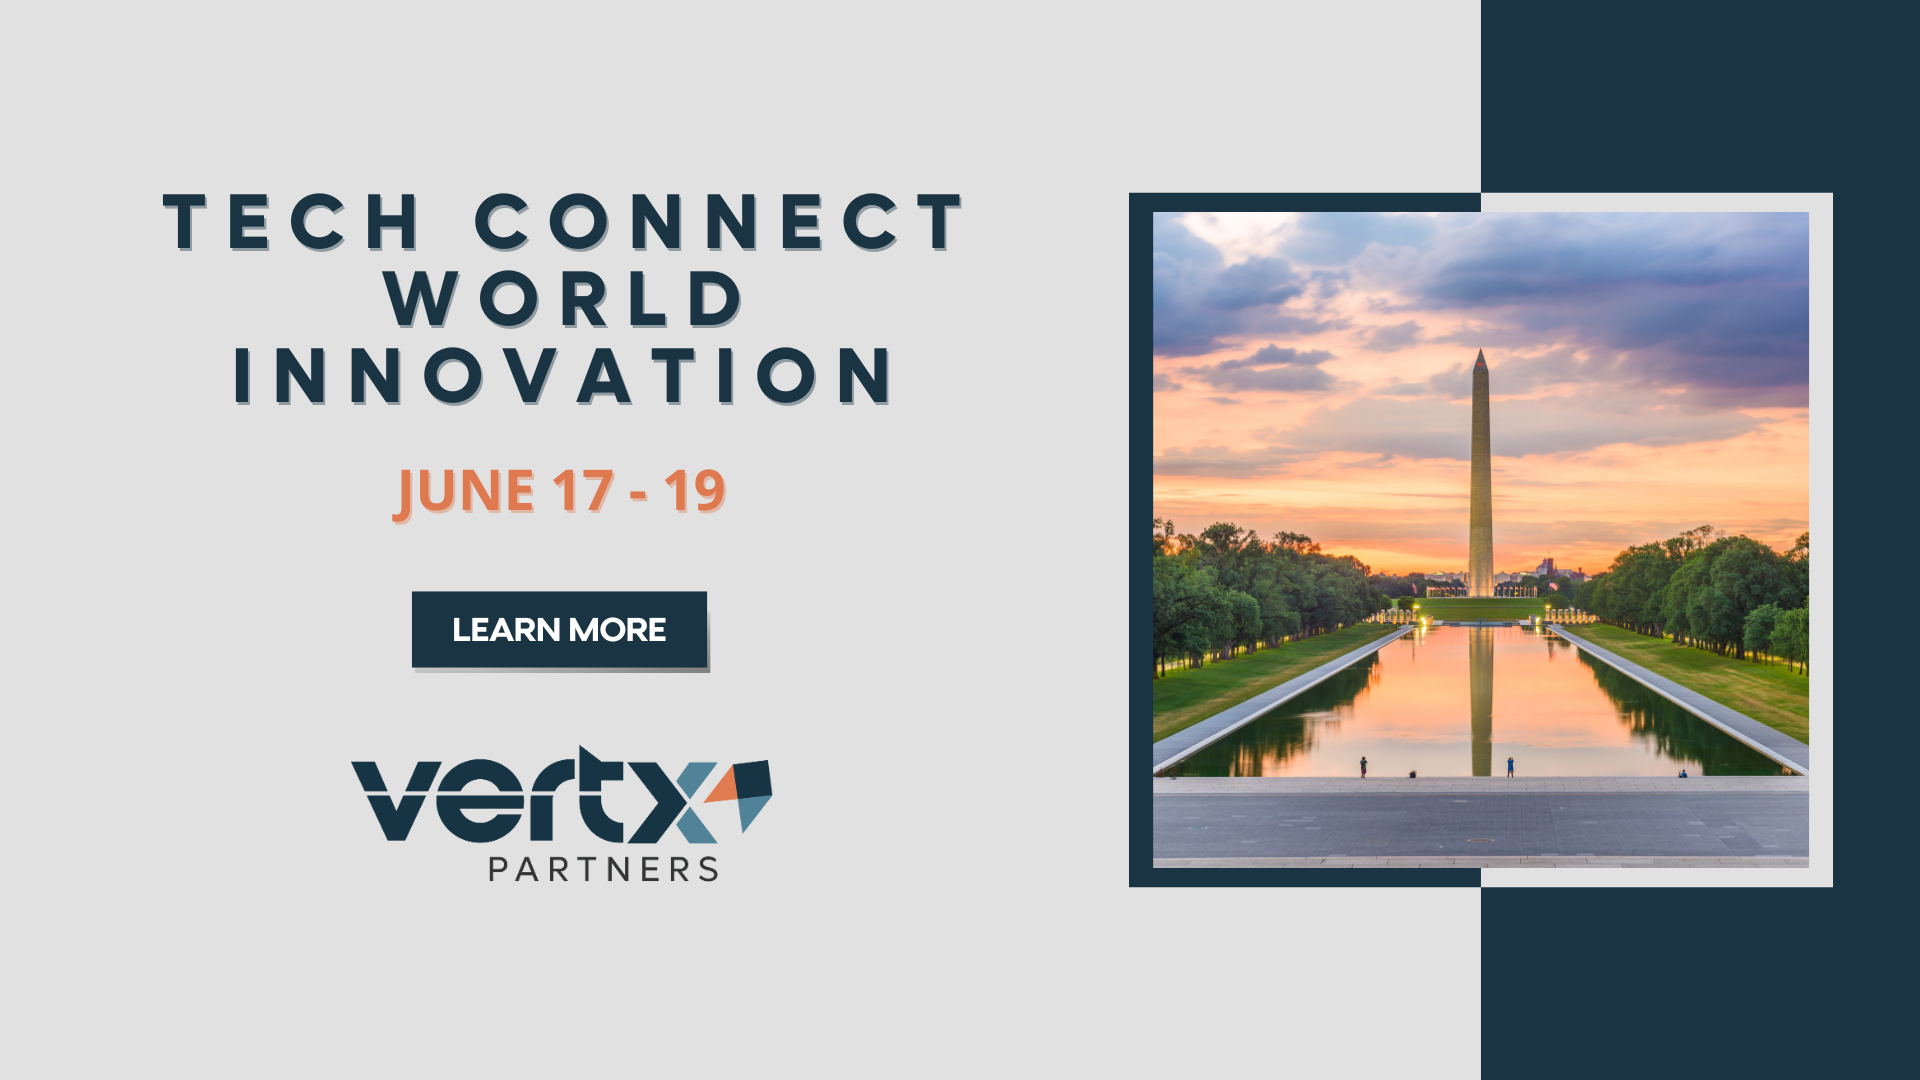 This graphic has the title Tech Connect World Innovation with the date june 17-19 under it and a photo of the capital next it with a sunset in the background